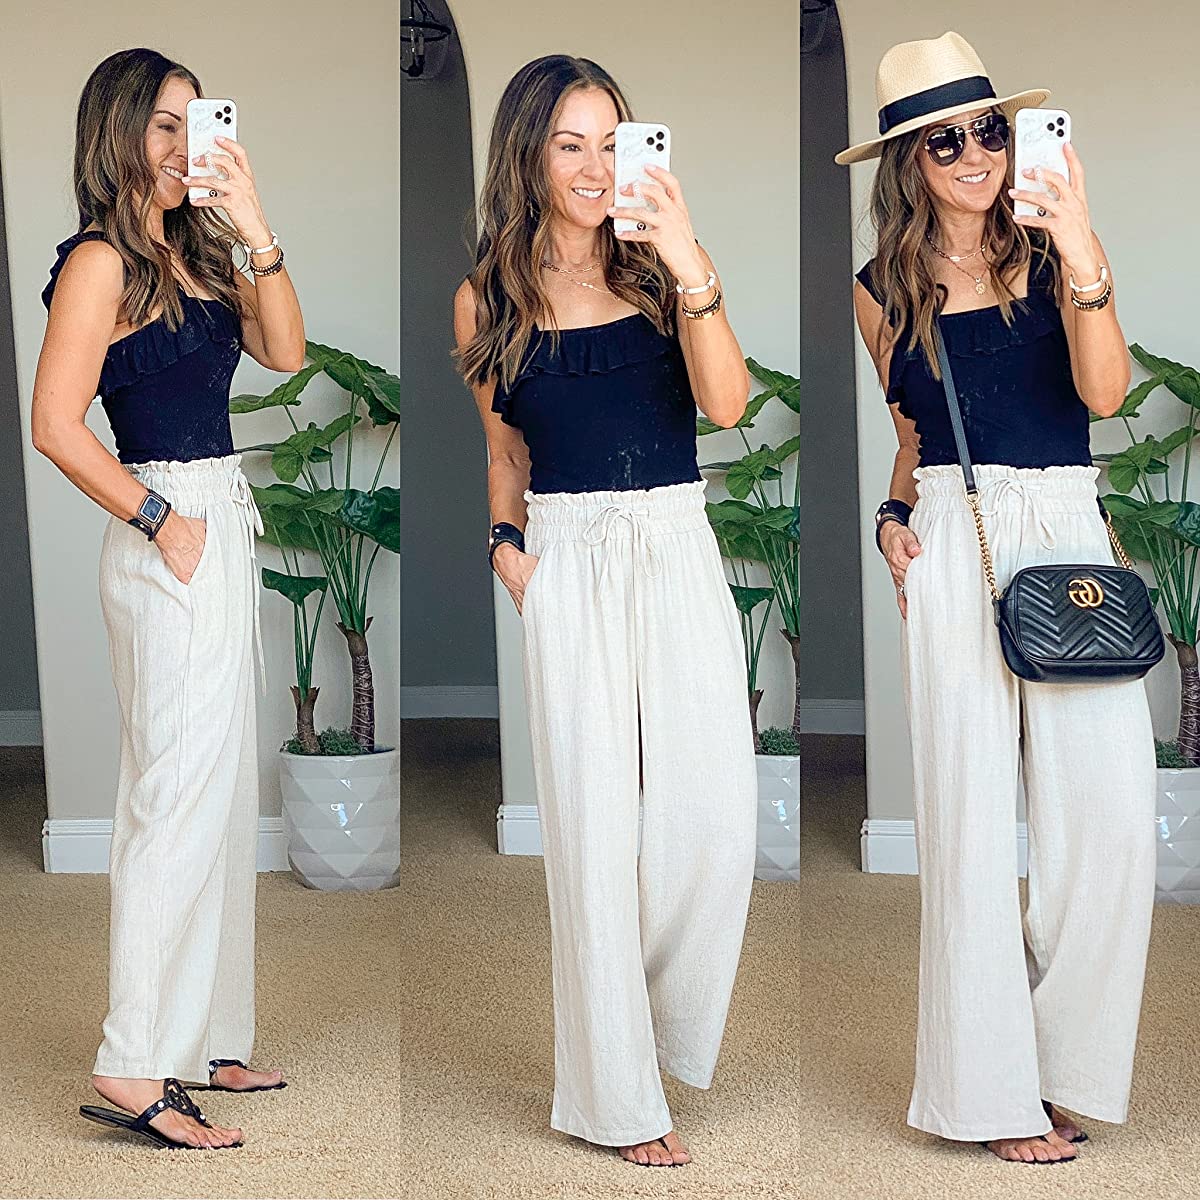 the ultimate girls trip to cabo come with me | girls trip, cabo, resort, spa resort, mexico, resort wear, vacation outfit, travel outfit, linen pants, accessories, sunglasses, sun hat